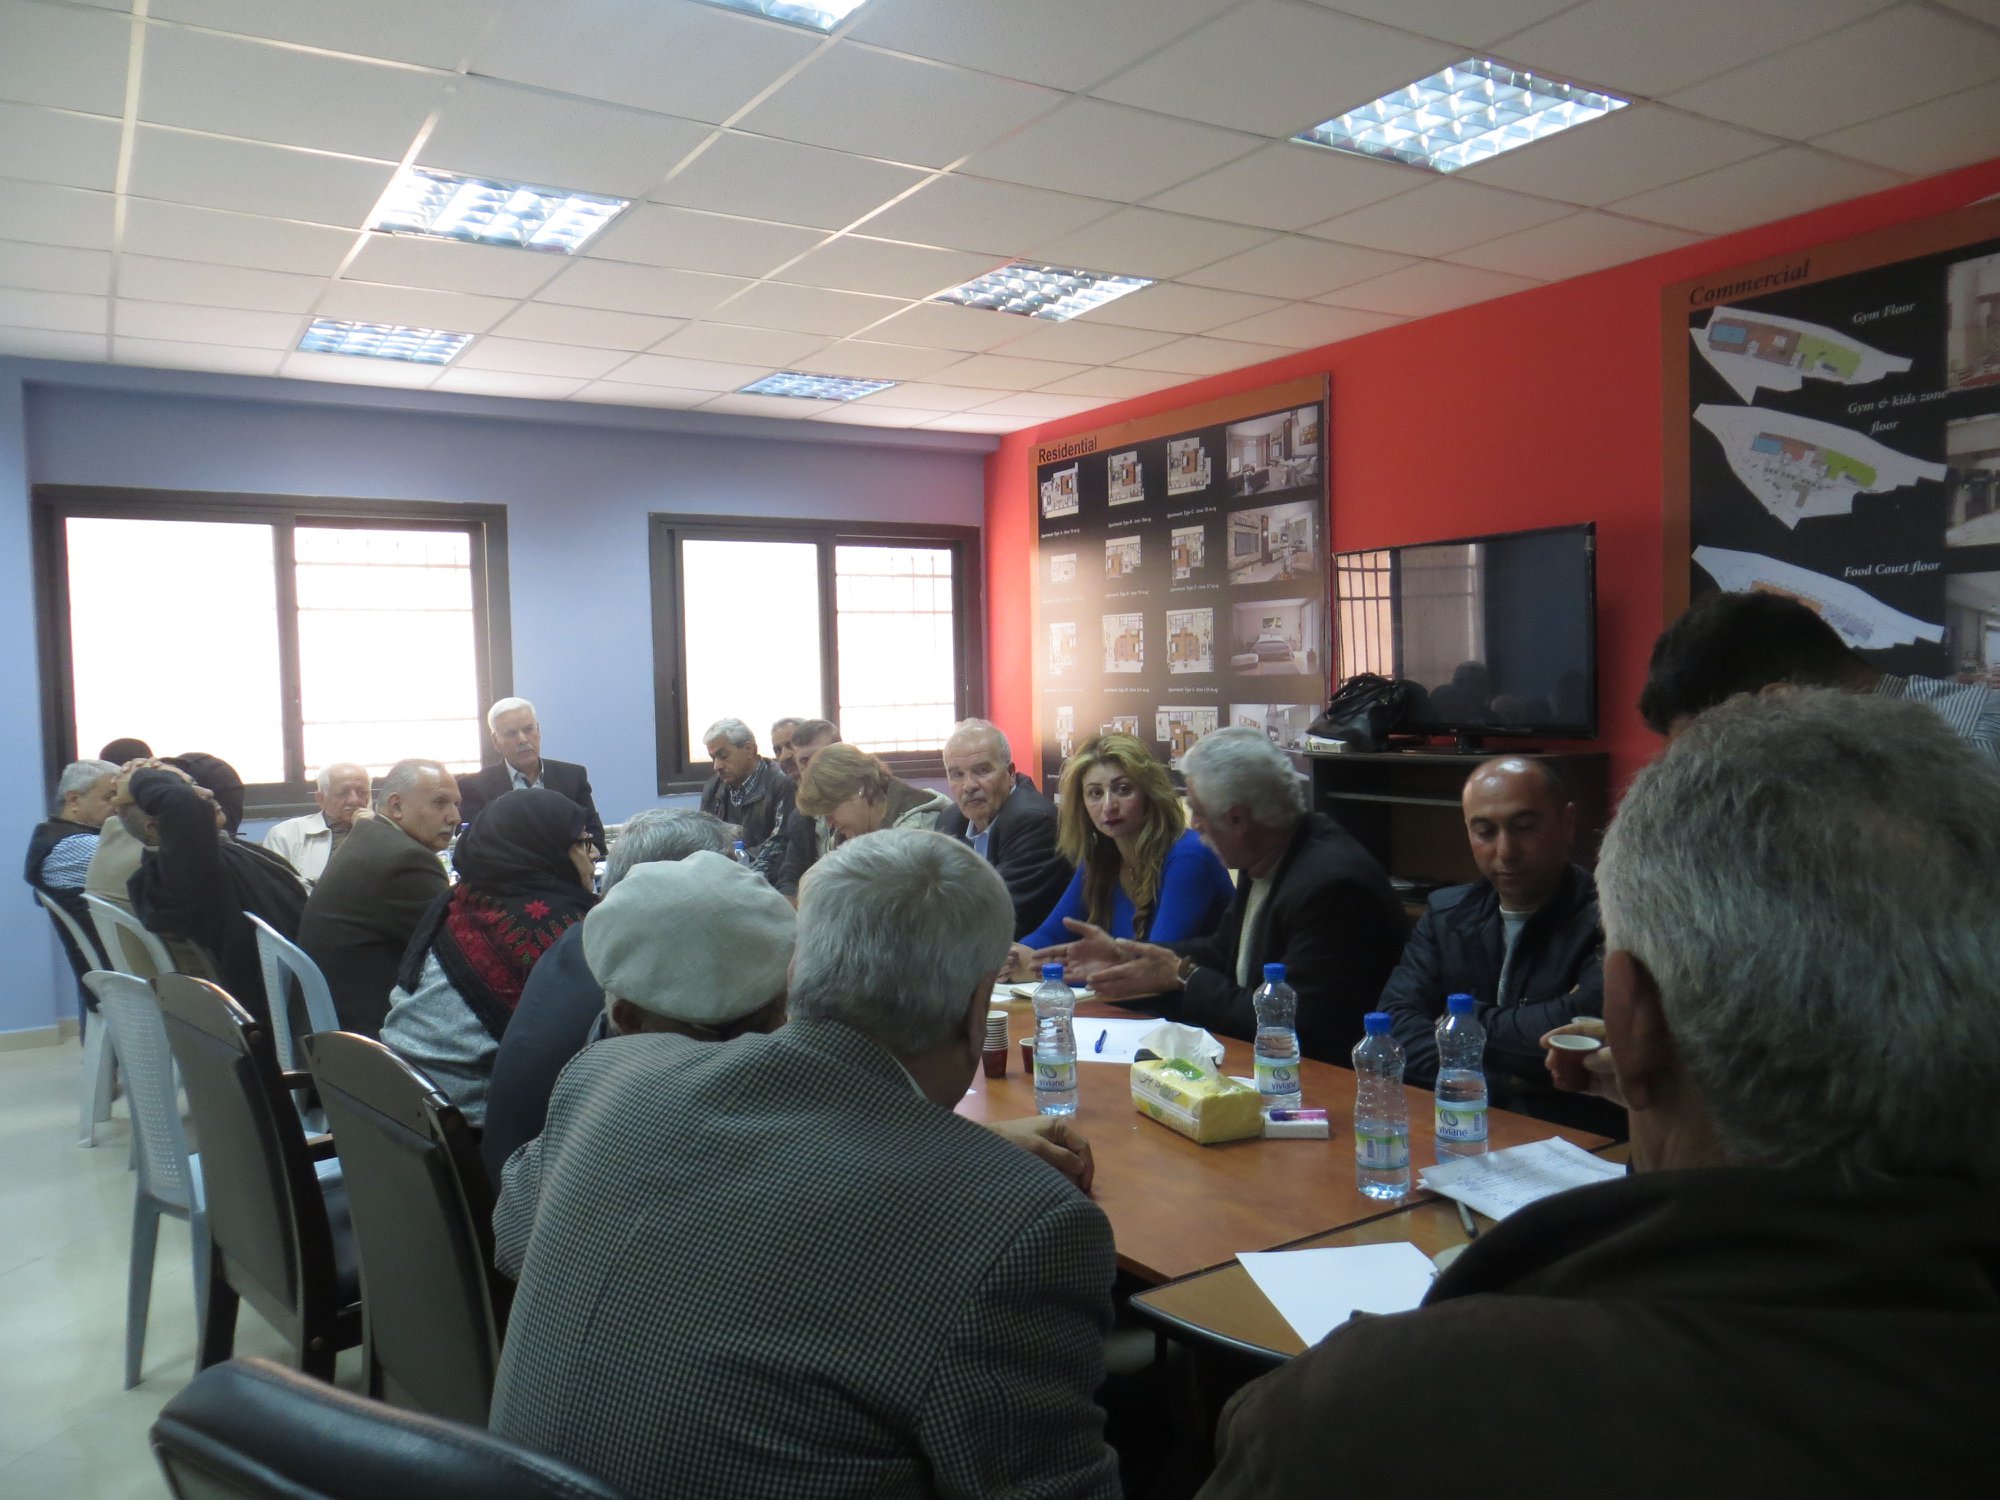  Roles for Social Change Association-ADWAR participated in Wataneyon to end the Palestinian Split’s expanded meeting, in which it aimed to activate the social mobility and working on implementing activities support the national reconciliation.